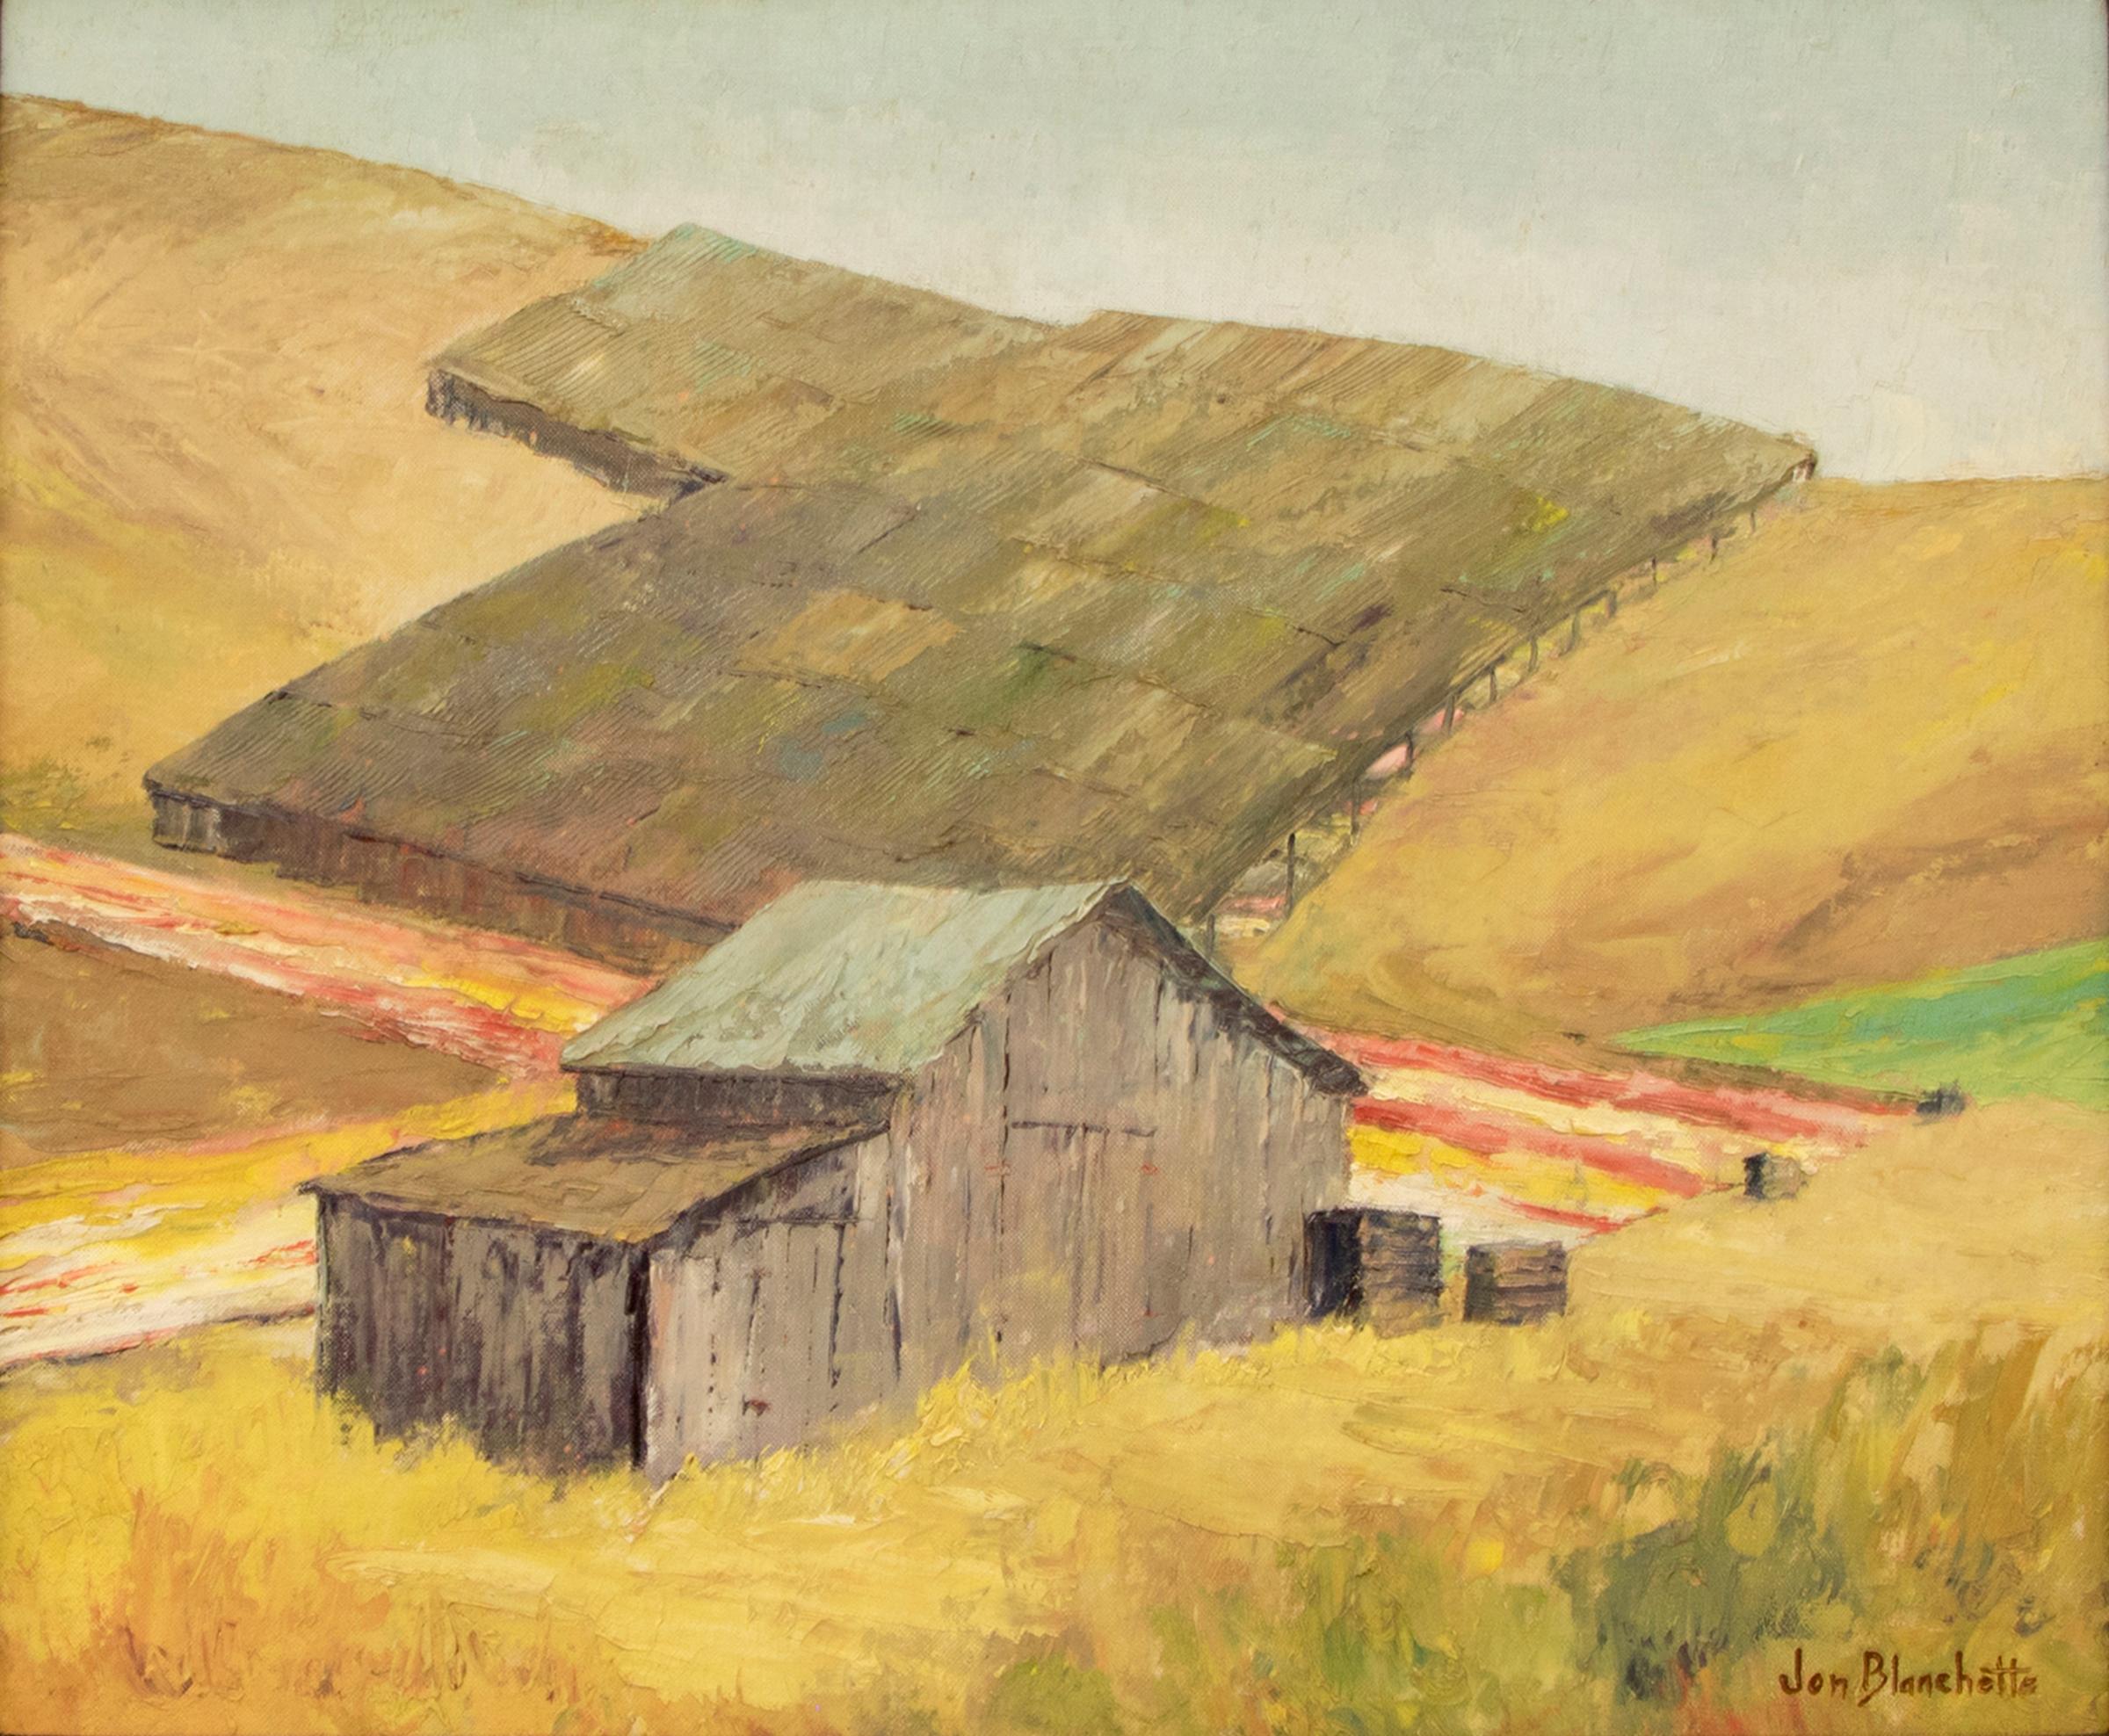 Mid Century Modern California Landscape, Barn and Fields, Green, Gray, Gold - Painting by Jon Blanchette